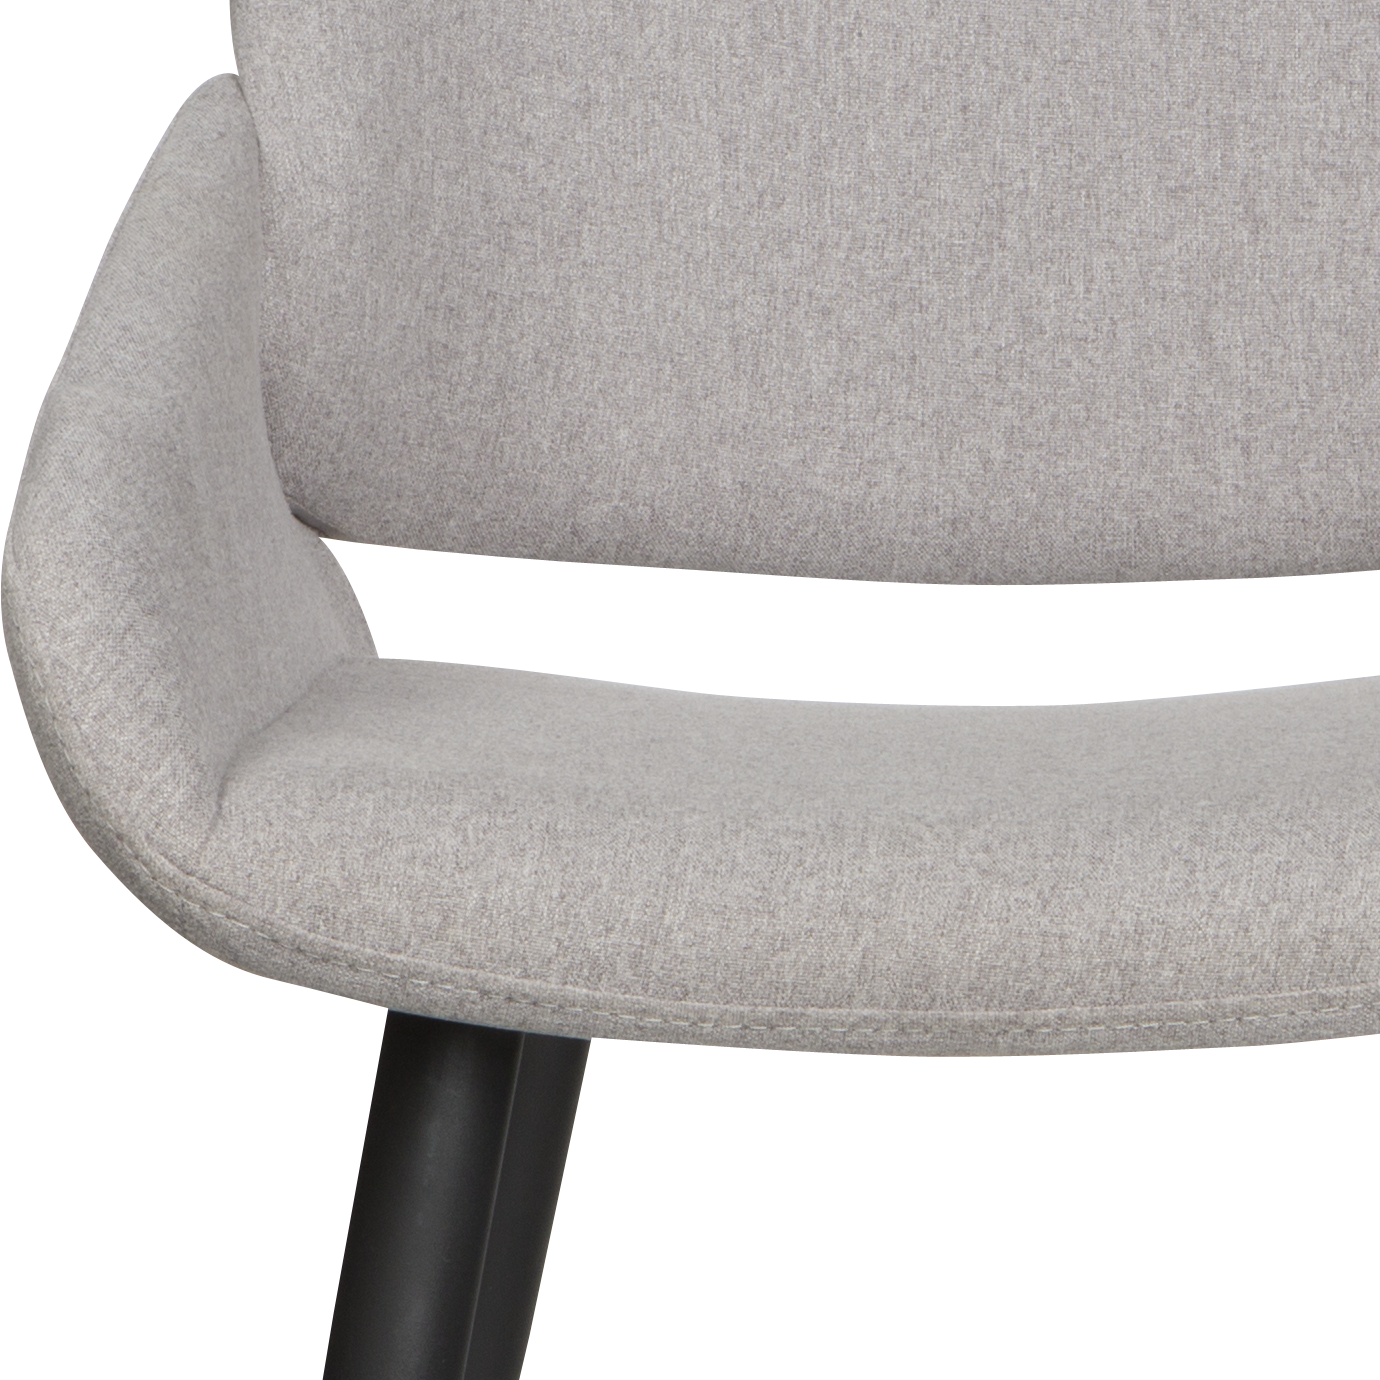 76810 MANFRED Chair